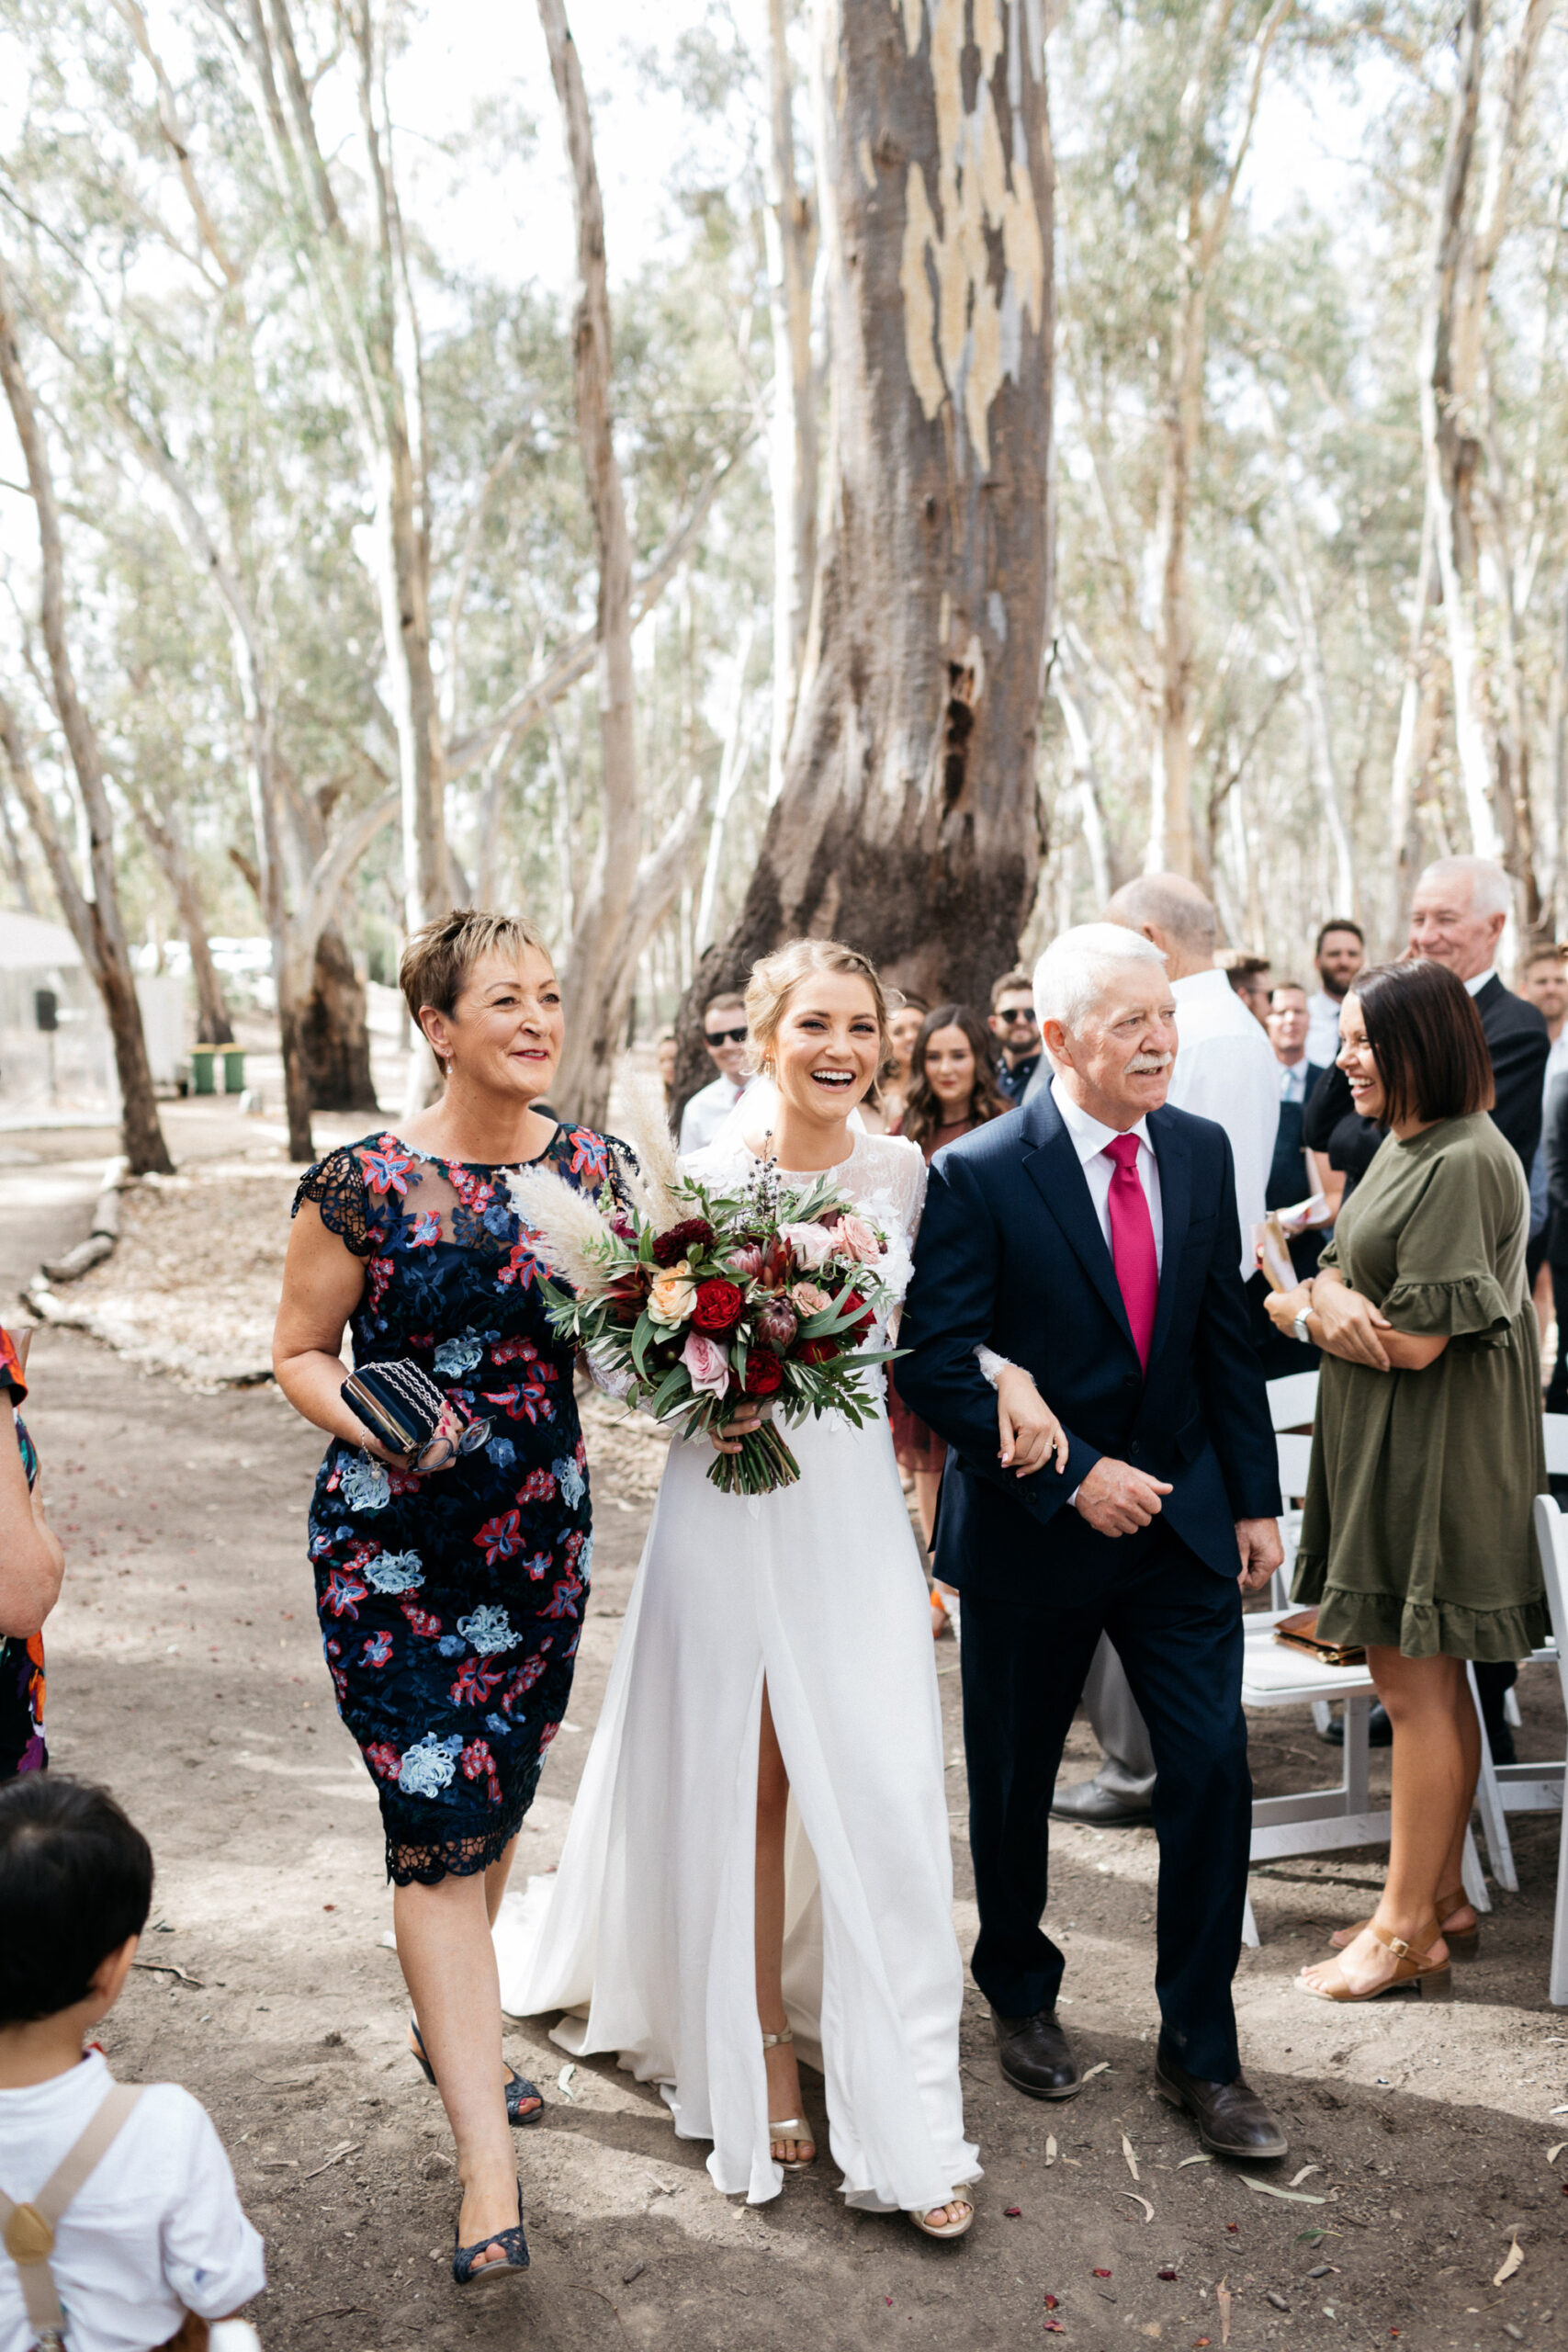 Holly Riley Native Bush Wedding The White Tree SBS 021 scaled